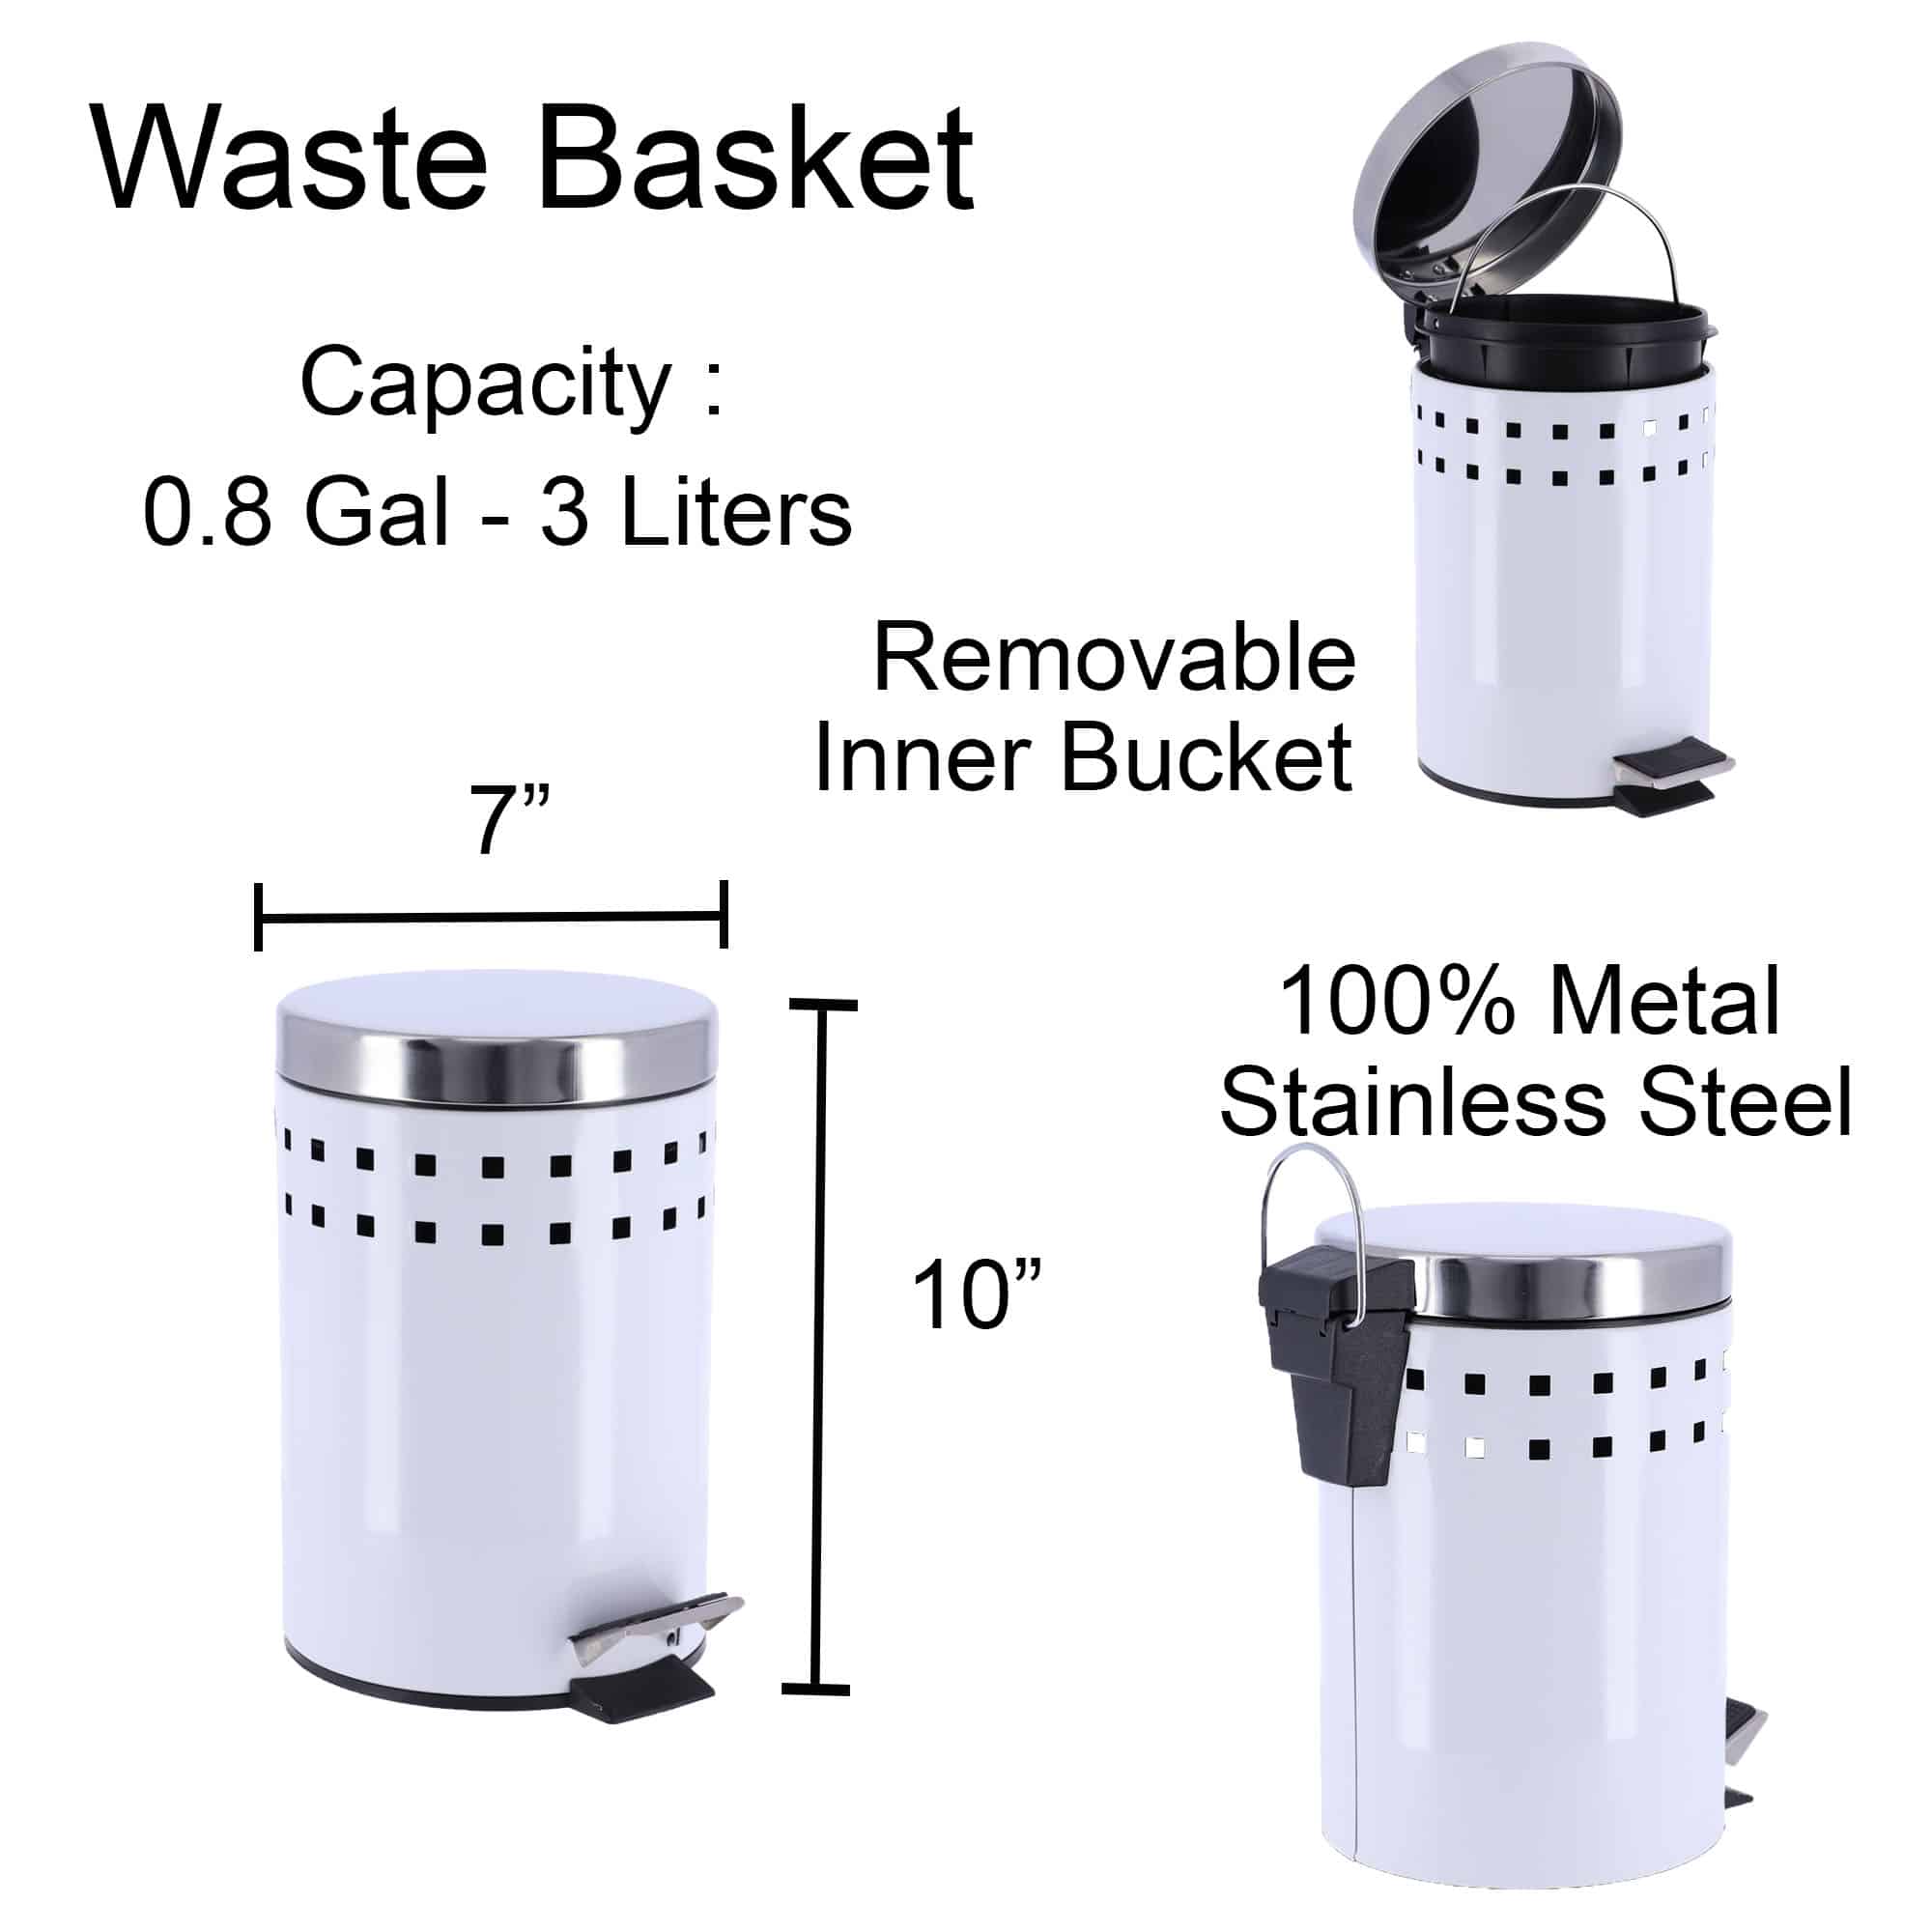 https://evideco.com/wp-content/uploads/2018/09/6502100-White-Round-Metal-Small-Step-Trash-Can-with-Lid-Waste-Bin-3-liters-0.8-gal-3.jpg